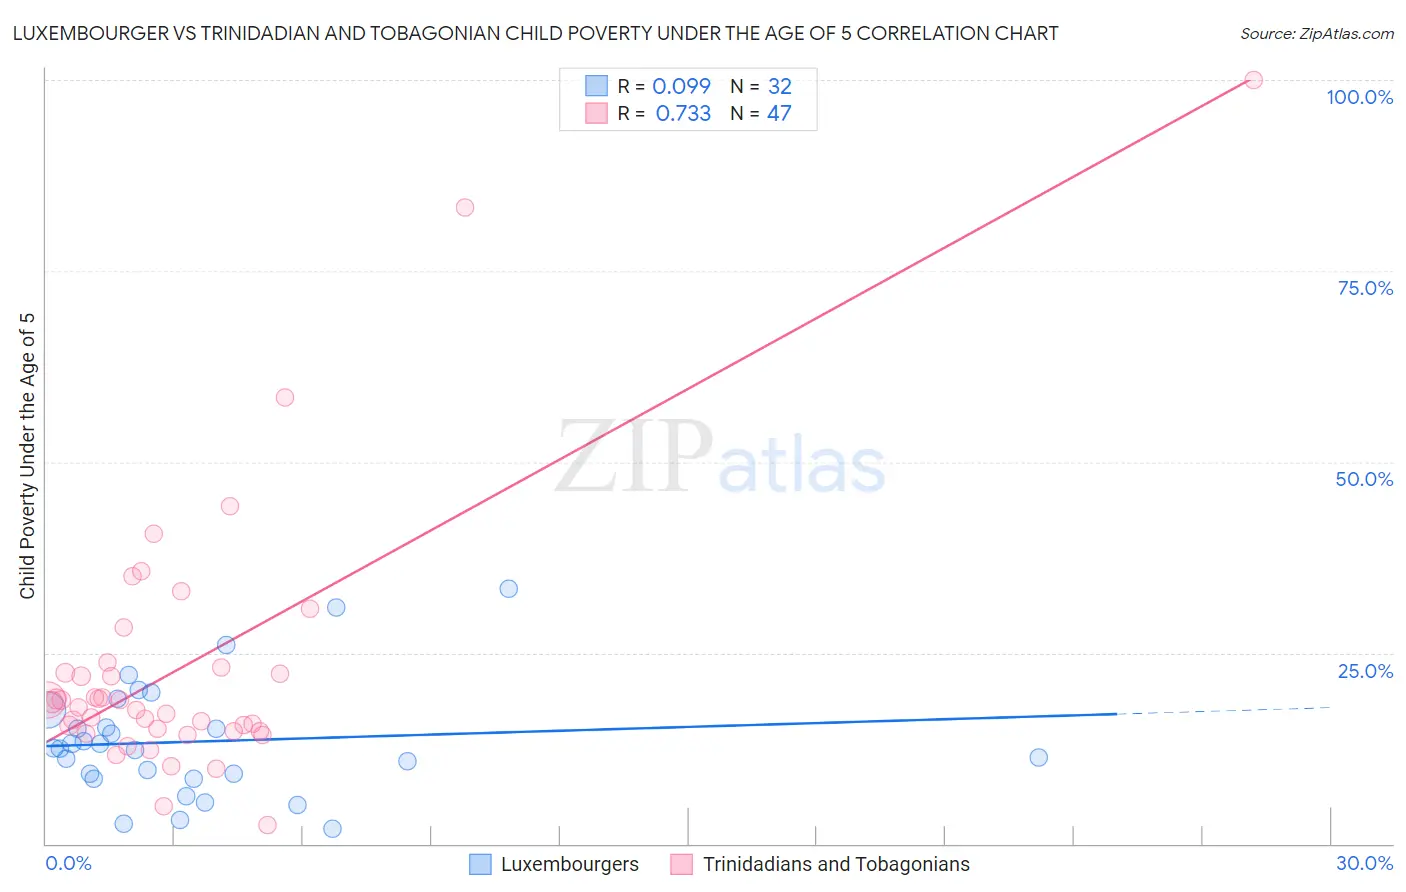 Luxembourger vs Trinidadian and Tobagonian Child Poverty Under the Age of 5